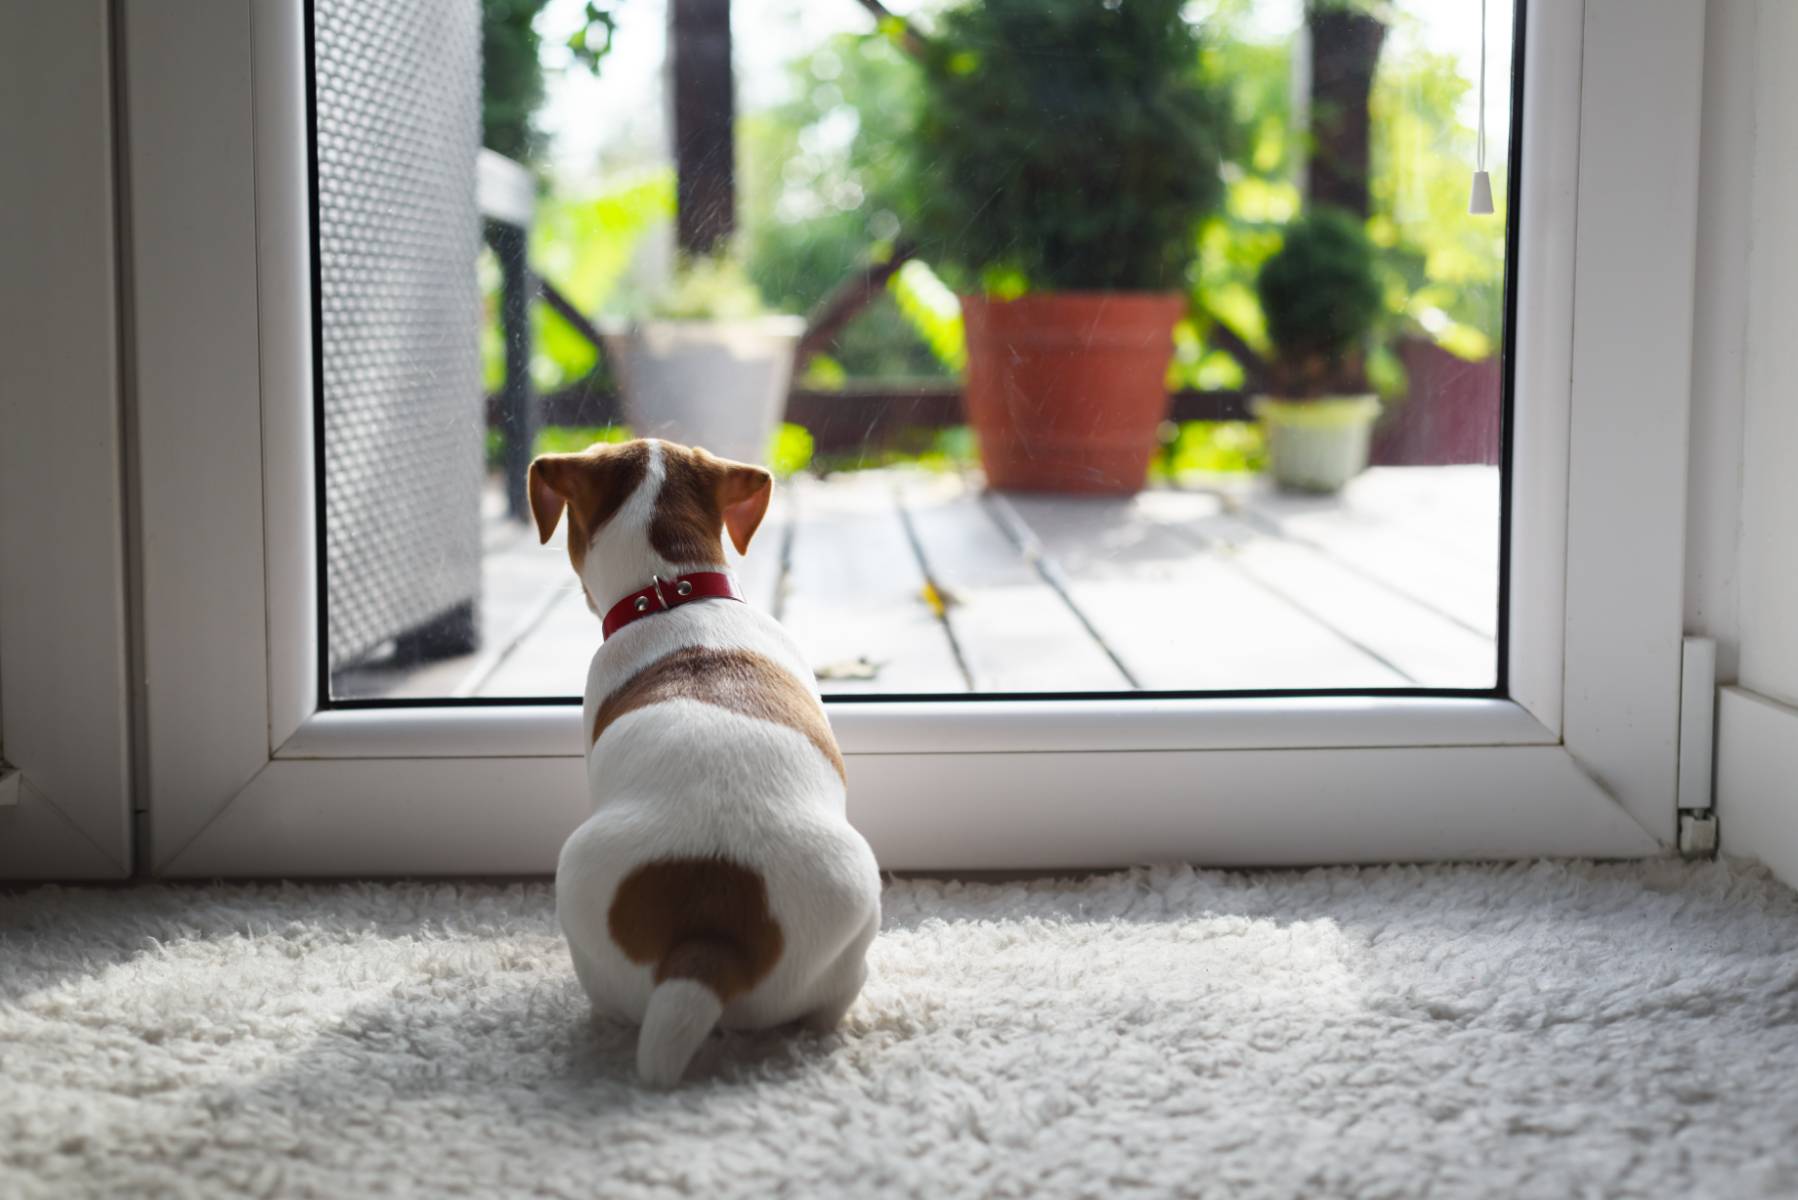 A small dog with a red collar sitting by a glass door, emphasizing the need for understanding how do automatic dog doors work to provide pets with easy outdoor access